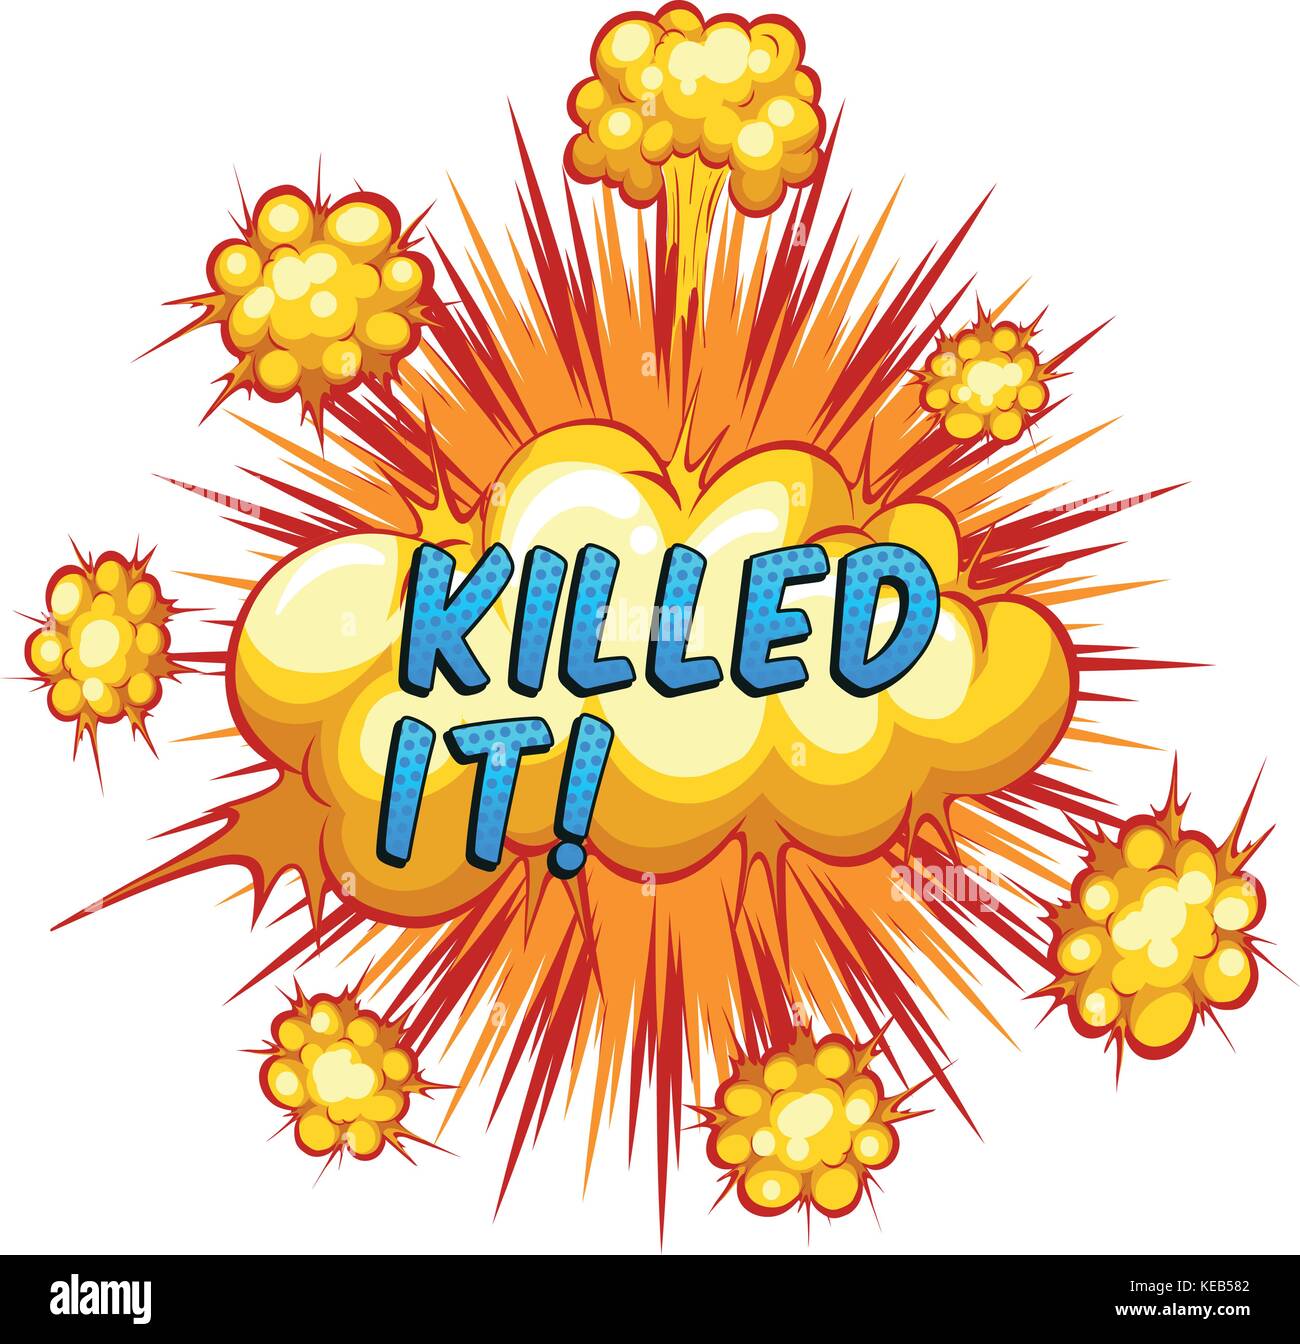 Word killed it with cloud explosion background Stock Vector